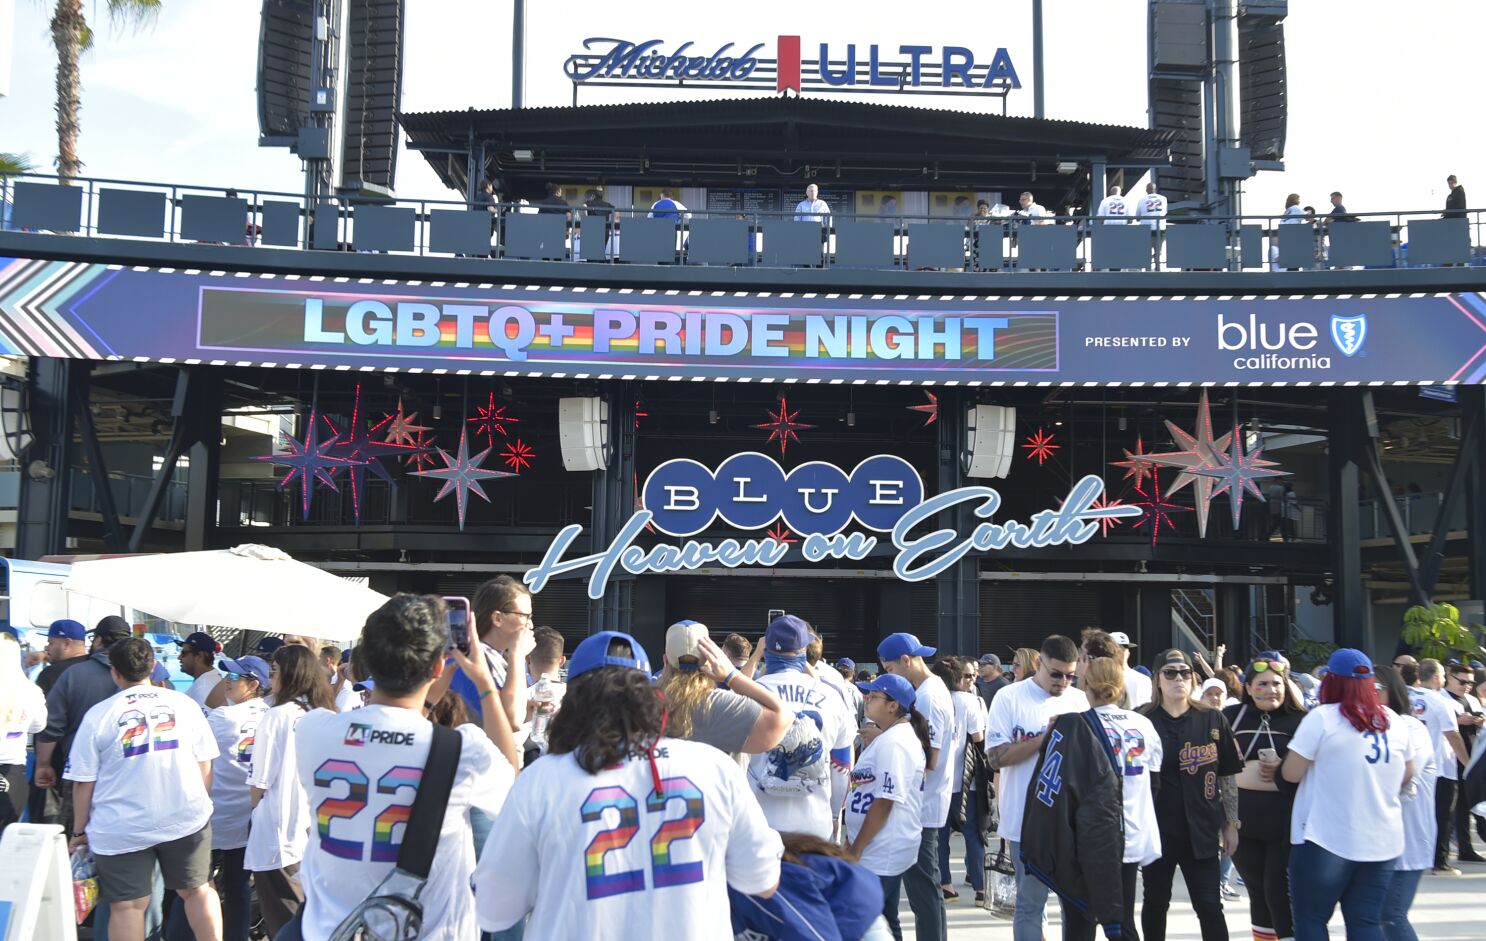 Dodgers Opinion: Pride Night fiasco not a great look for the Dodgers